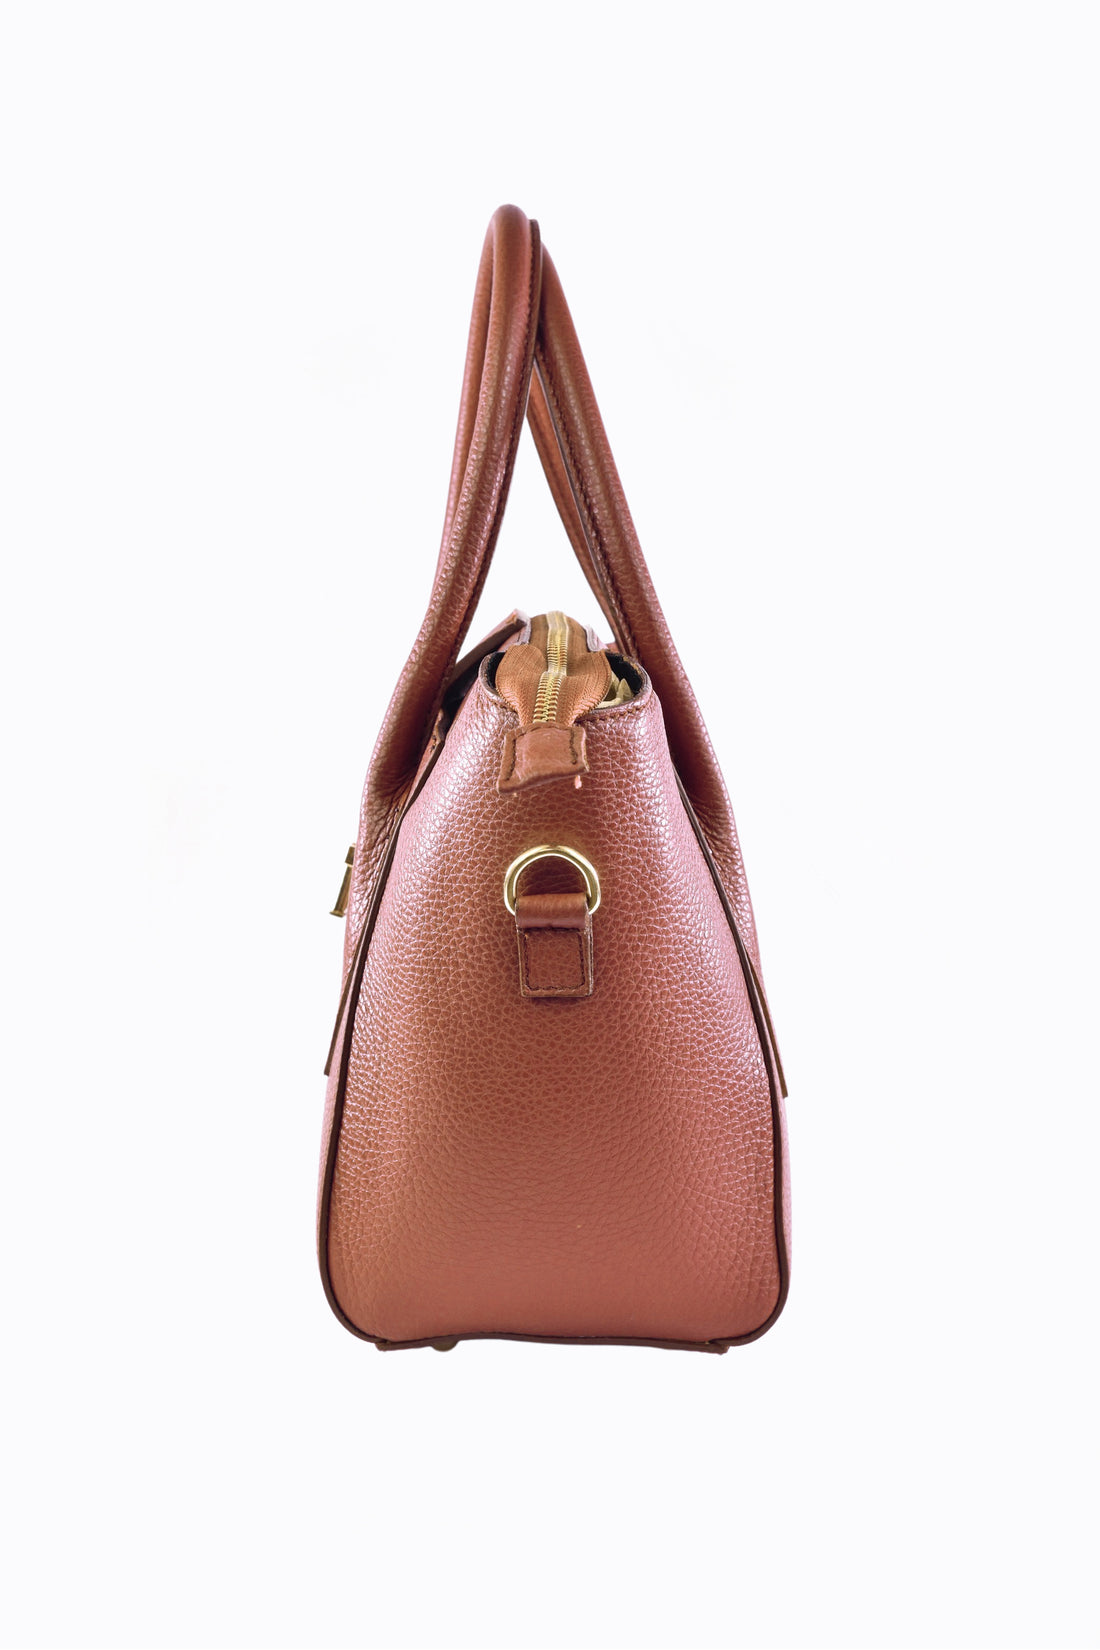 Kylie bag in Dollar Cuoio leather